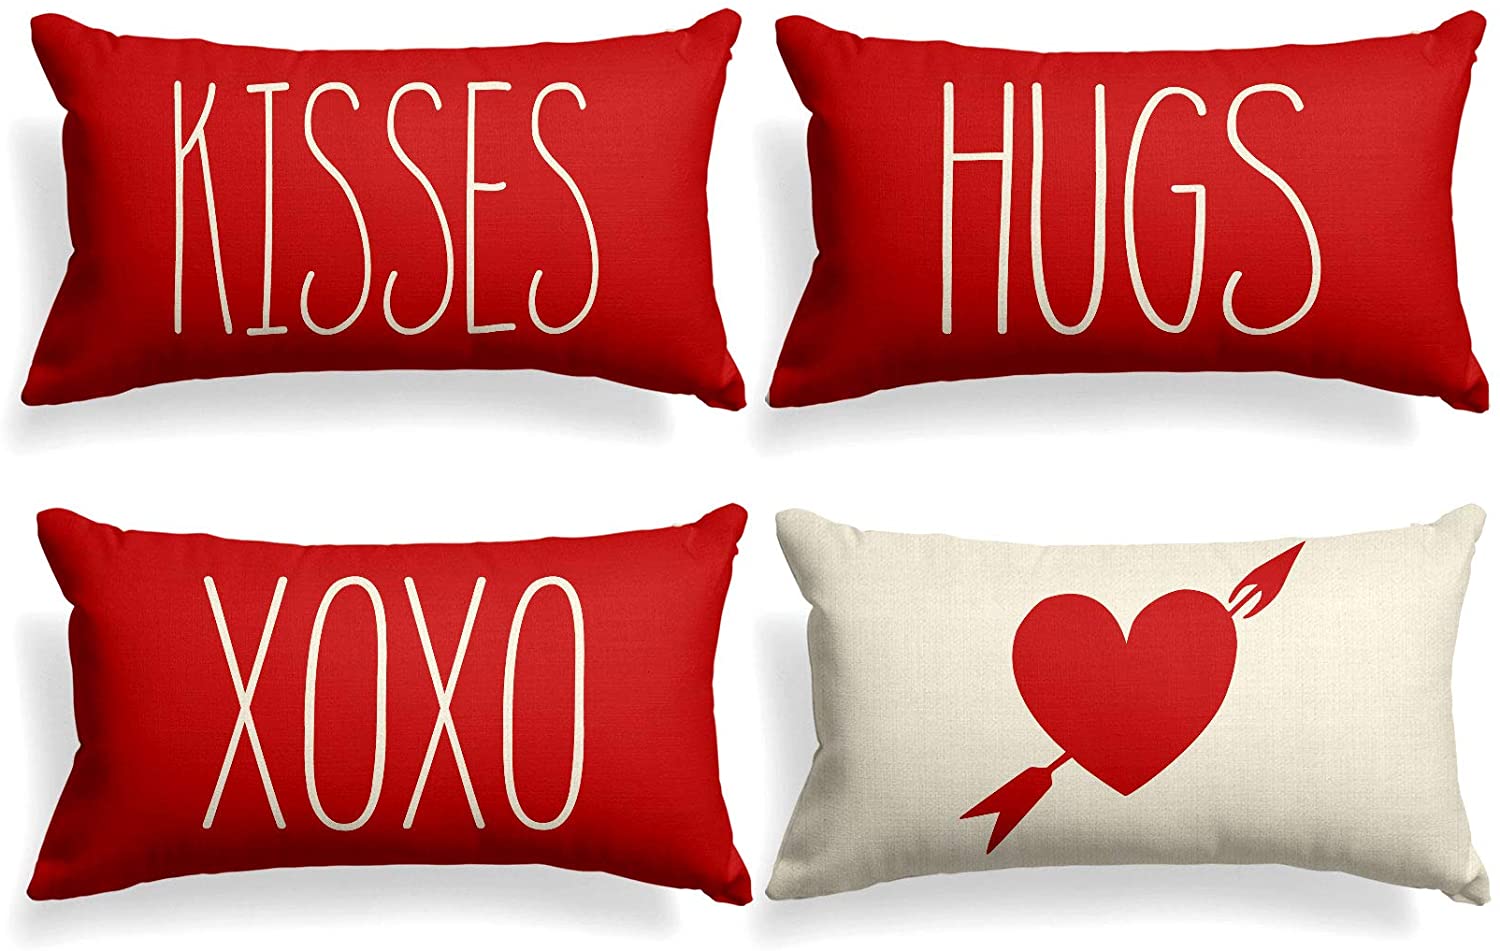 Beyond hugs and kisses this Valentines